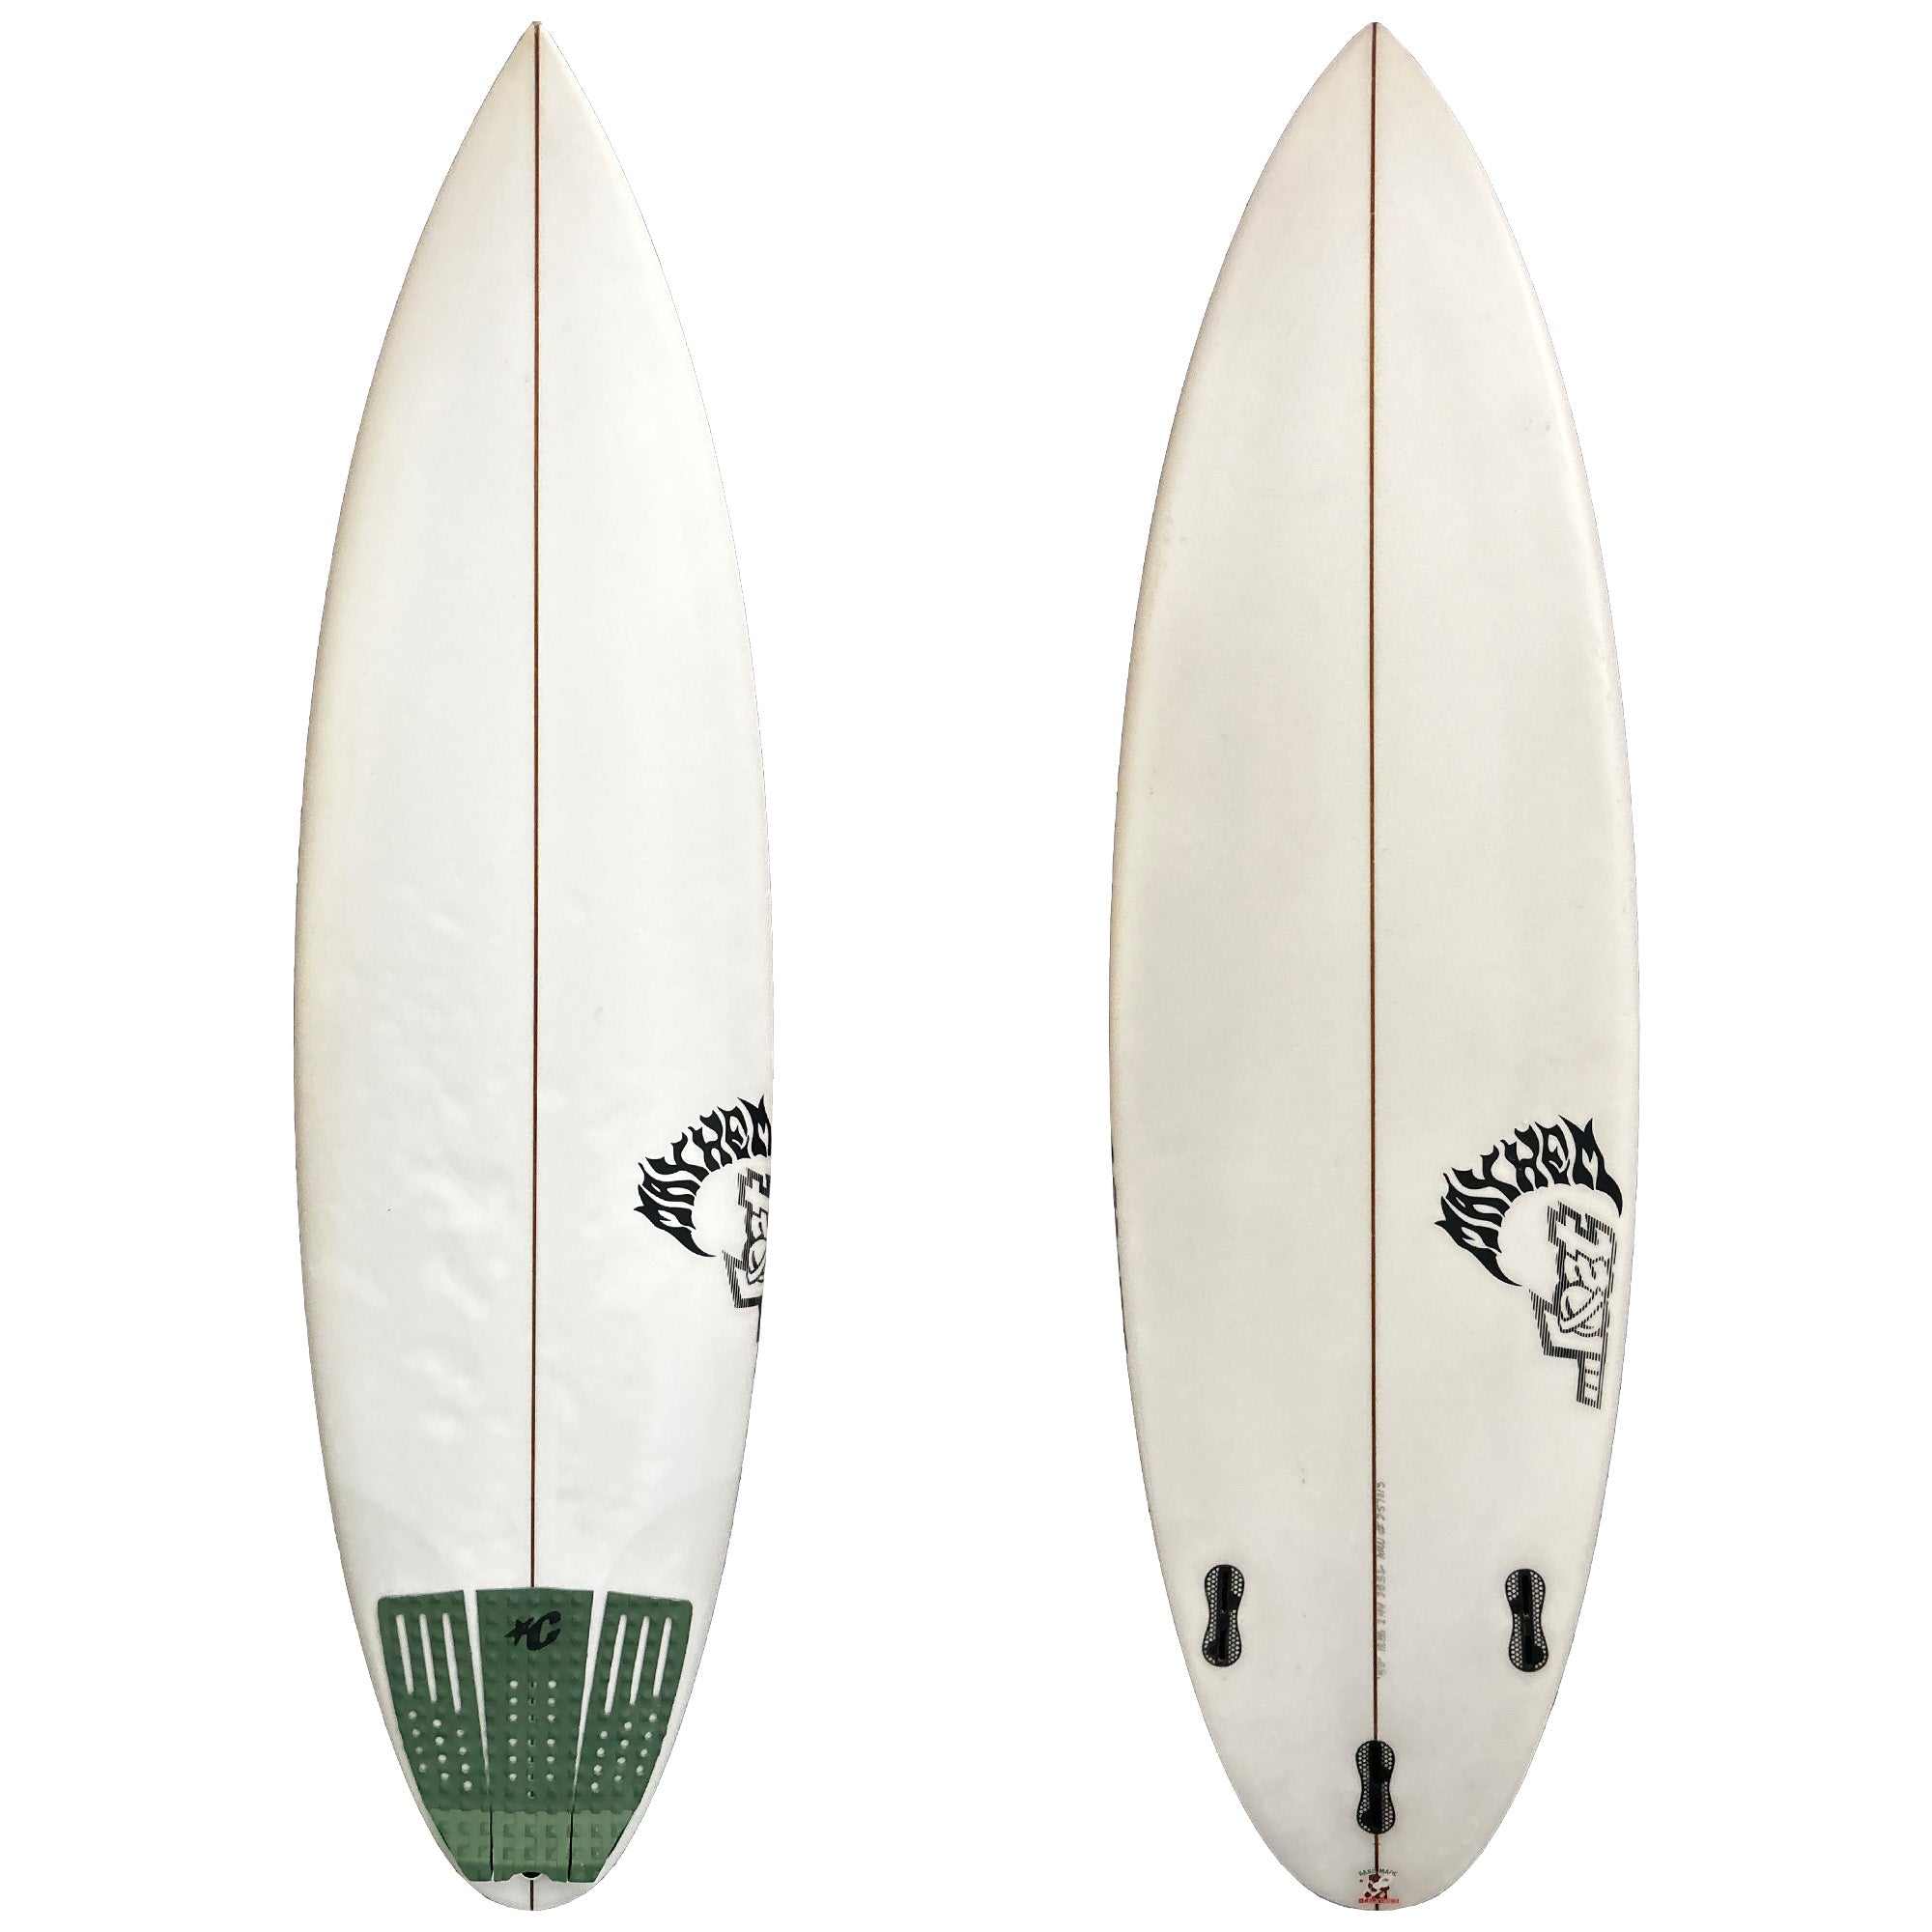 Lost Driver 3.0 5'11 Consignment Surfboard